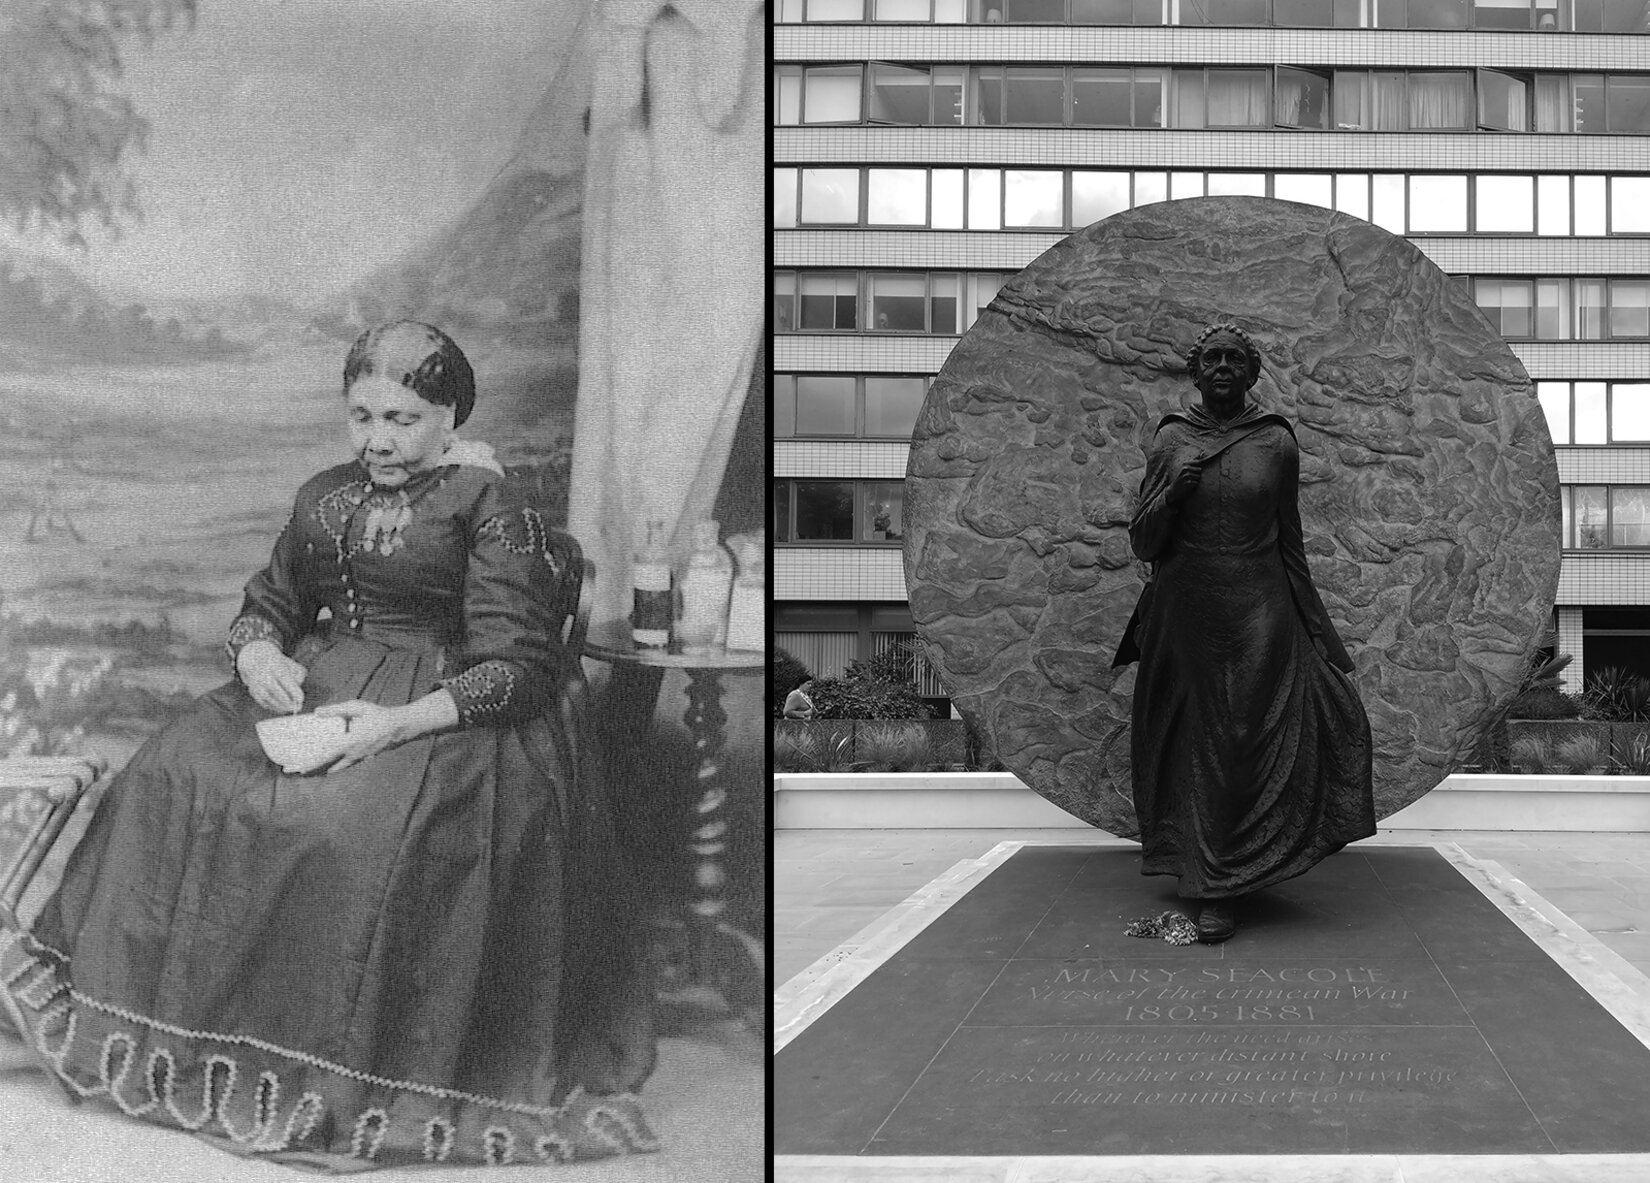 Left: Mary Seacole seated and looking down, while holding a bowl on her lap. Right: Black statue of Mary Seacole striding forward with round carved stone in background.